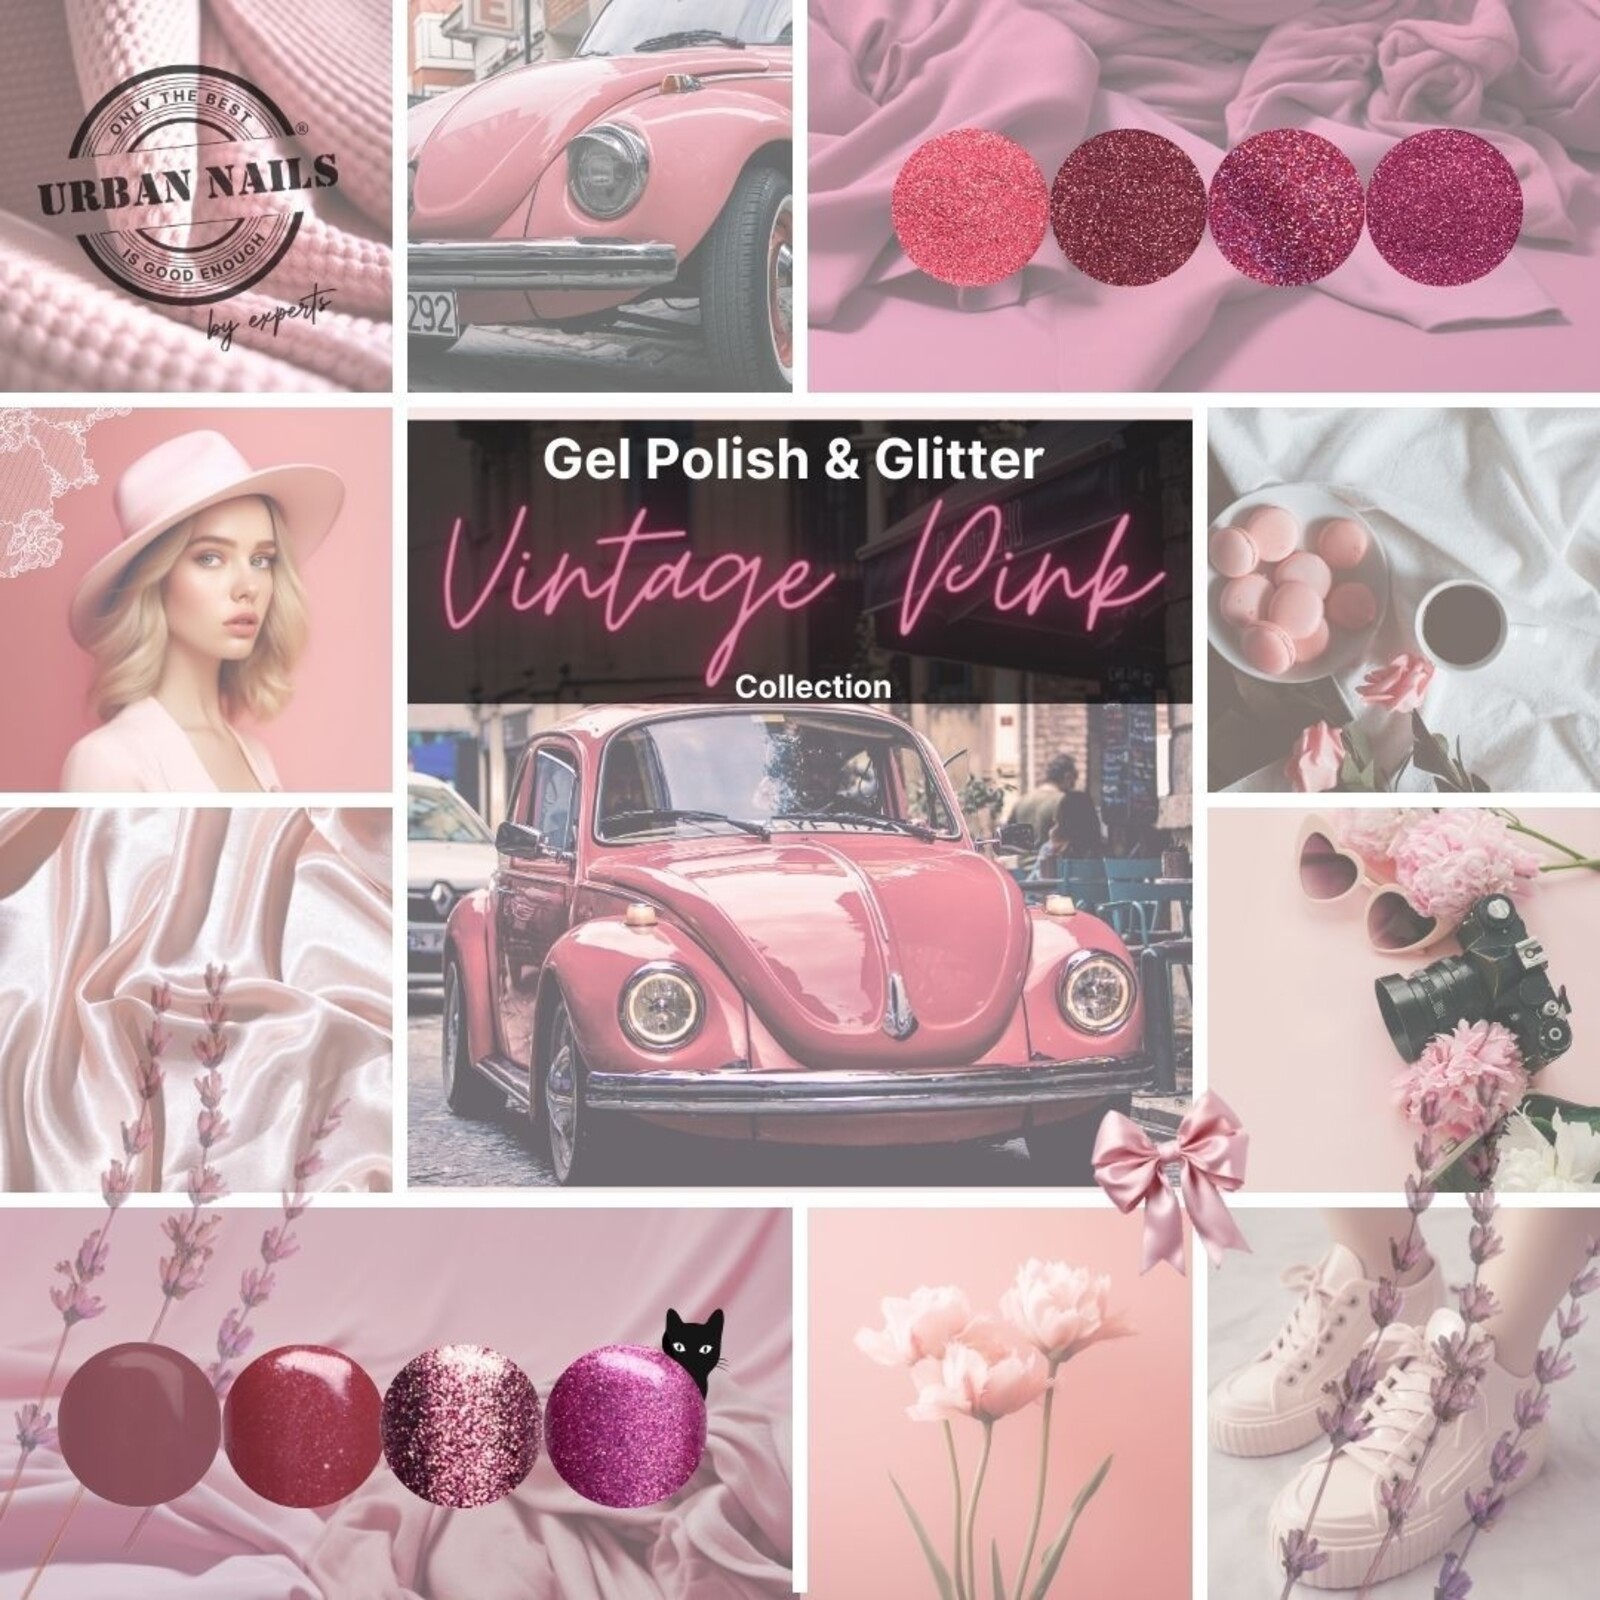 Urban nails Vintage Pink Glitter Collection